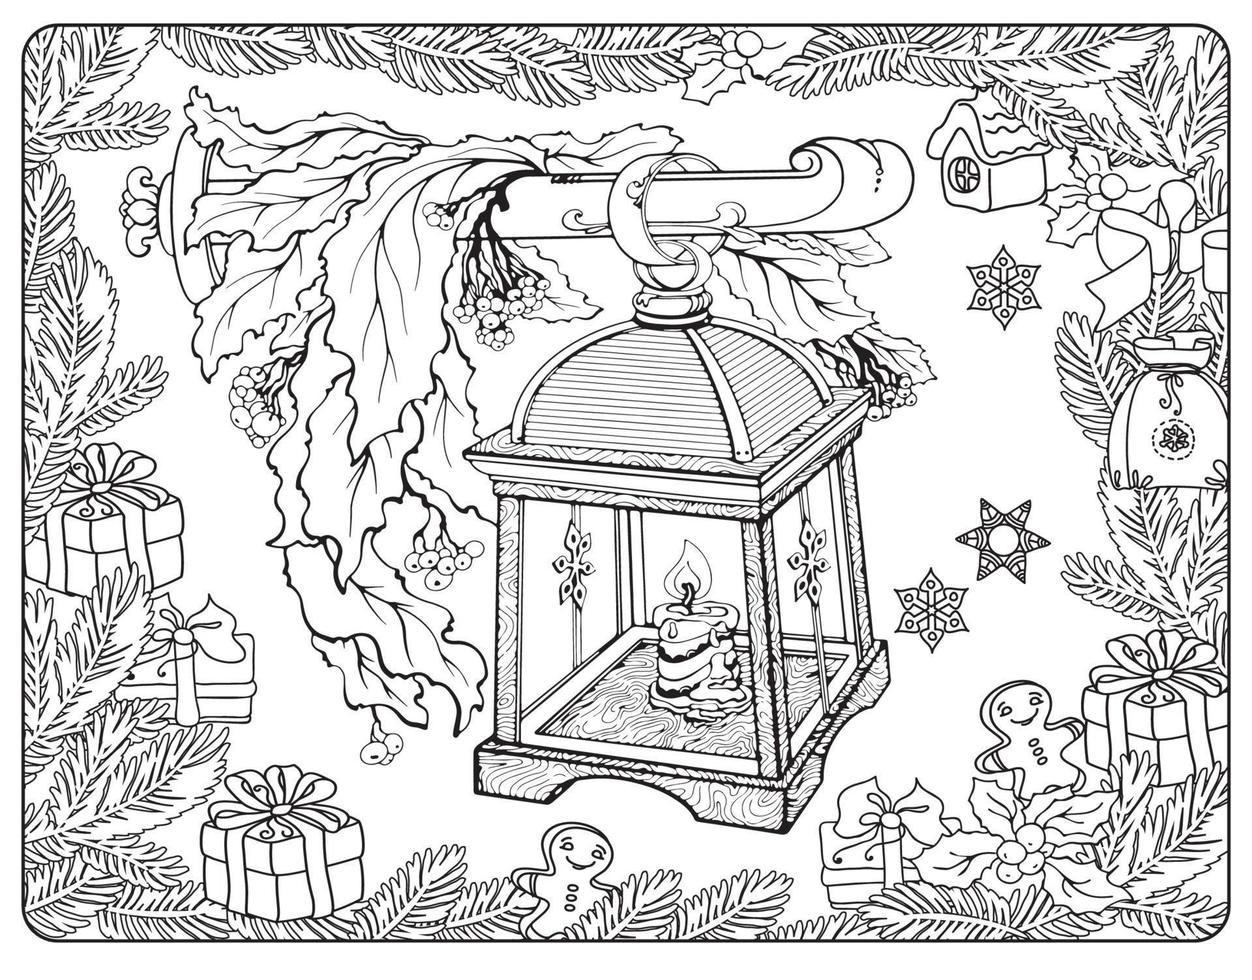 Coloring Page with winter lantern. Funny Christmas symbols. Vector illustration.